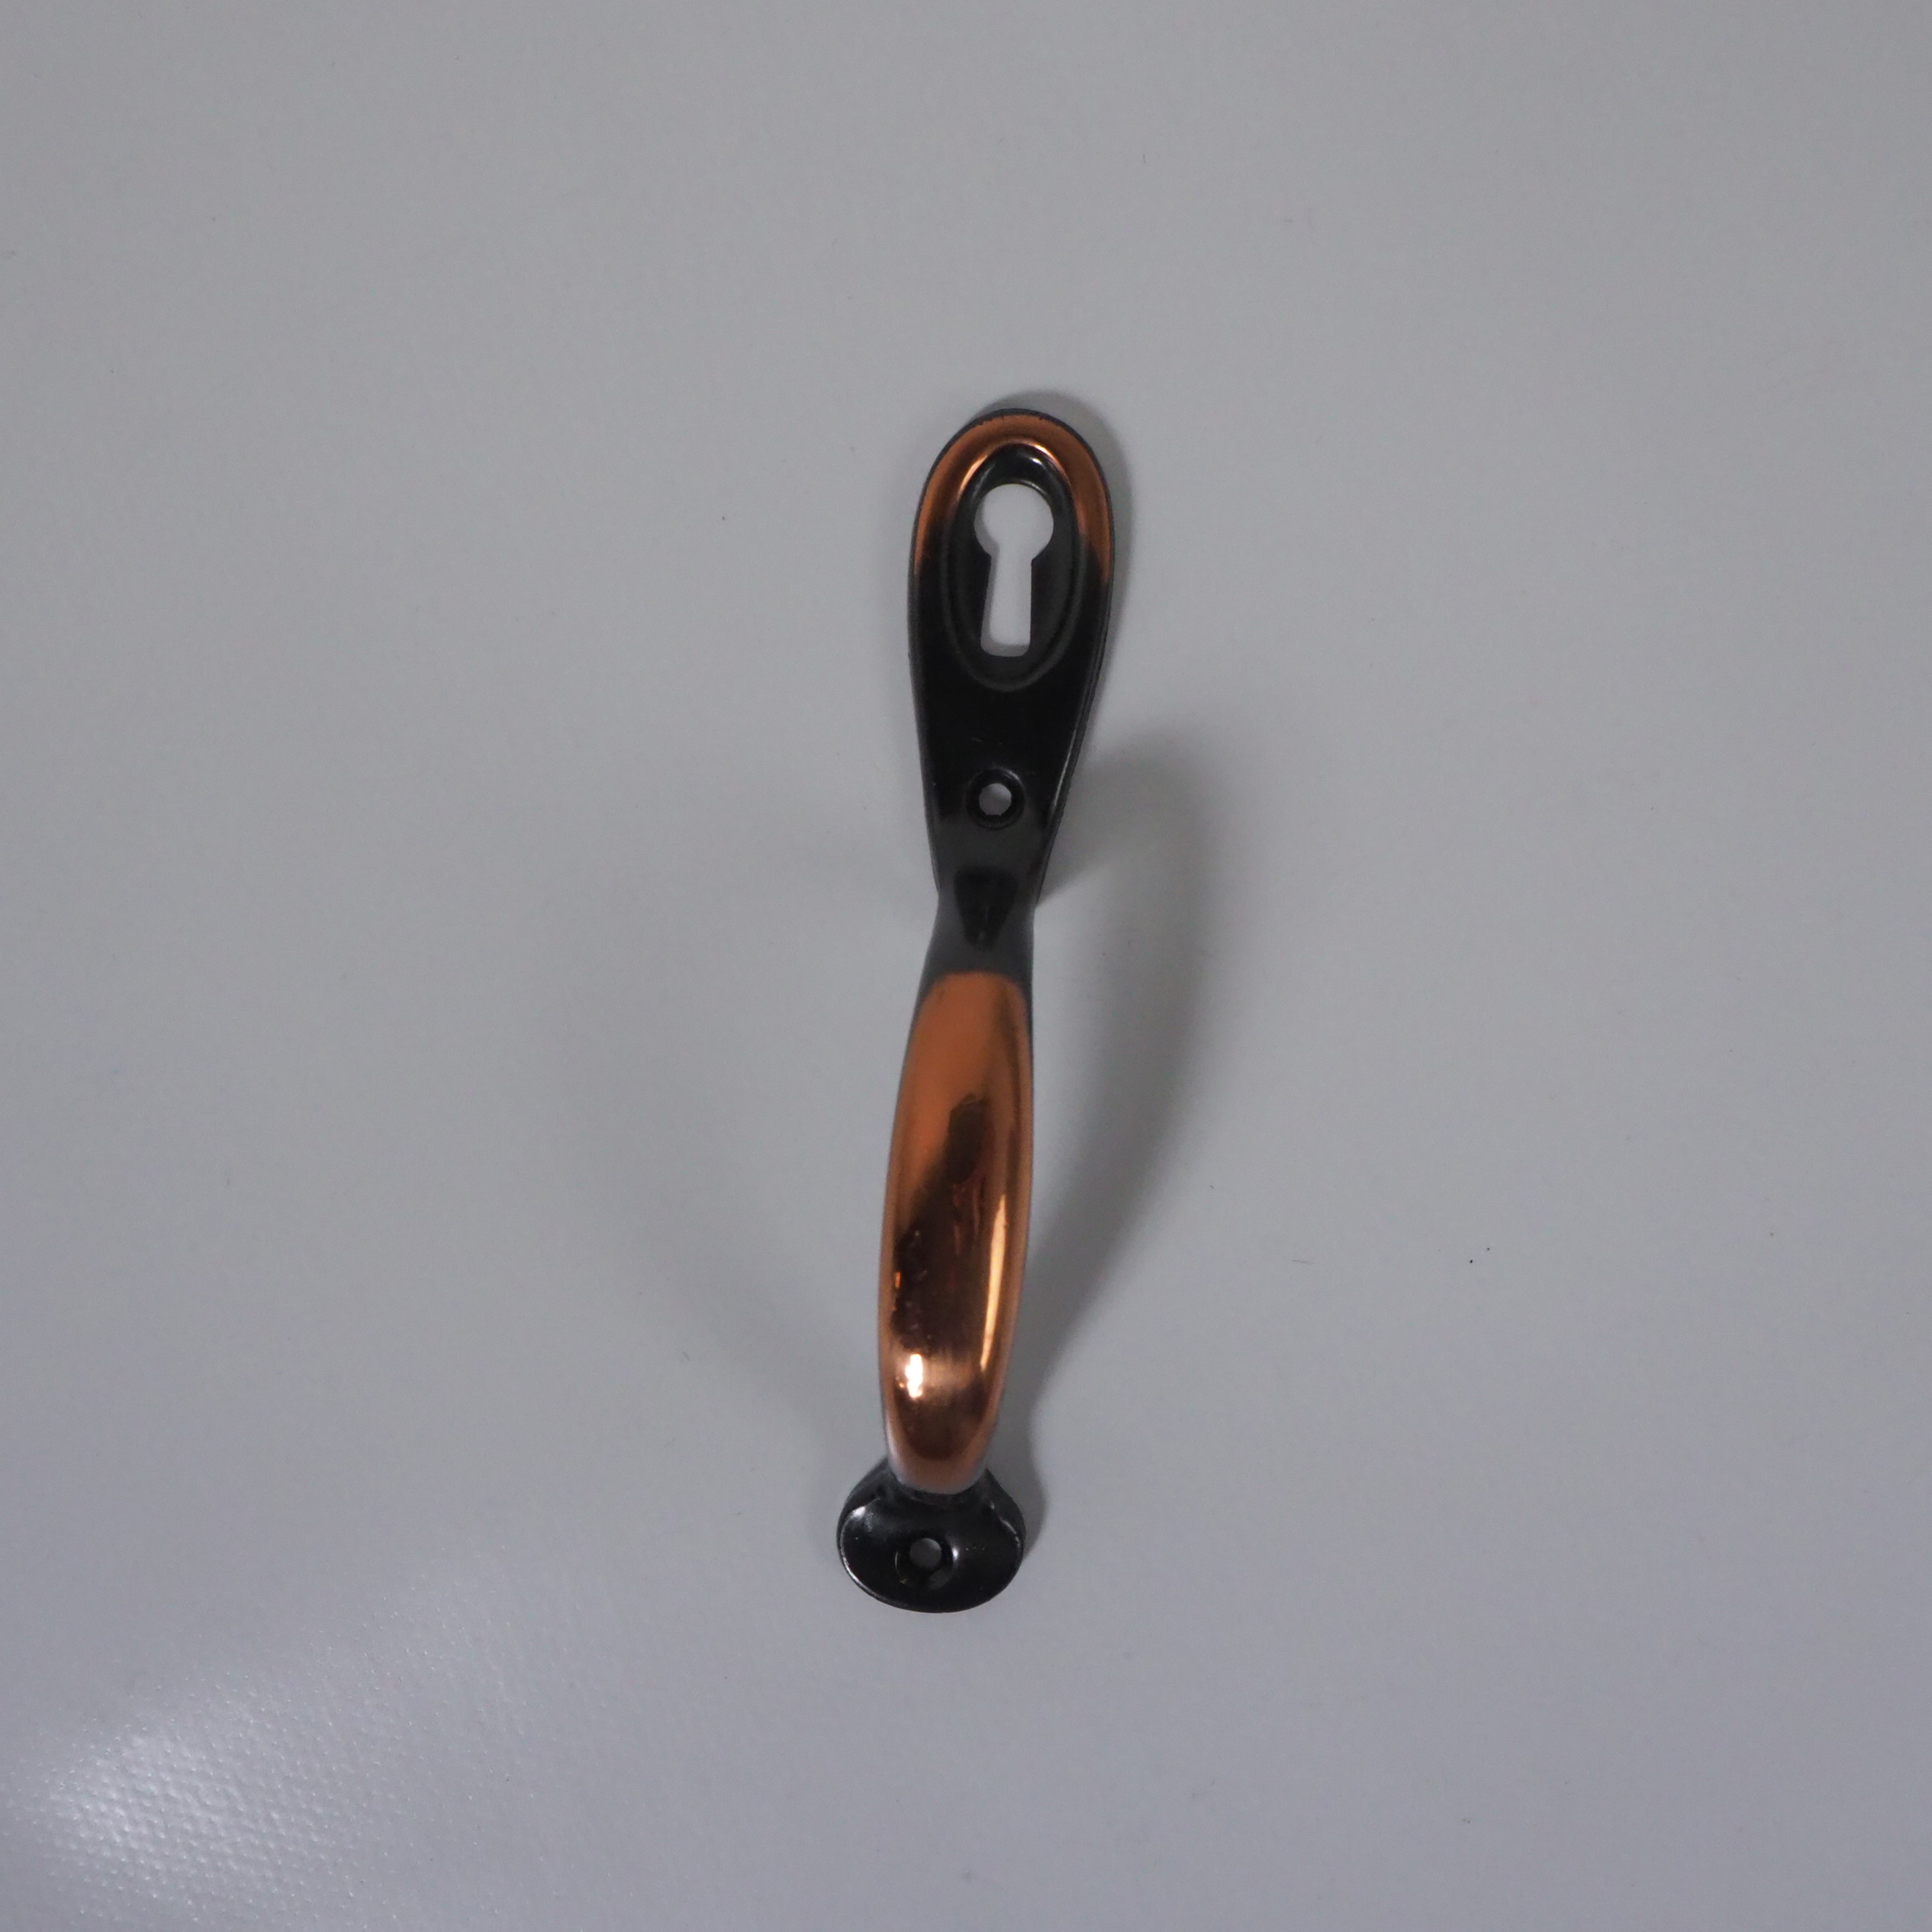 Copper plated steel cabinet handle with key hole